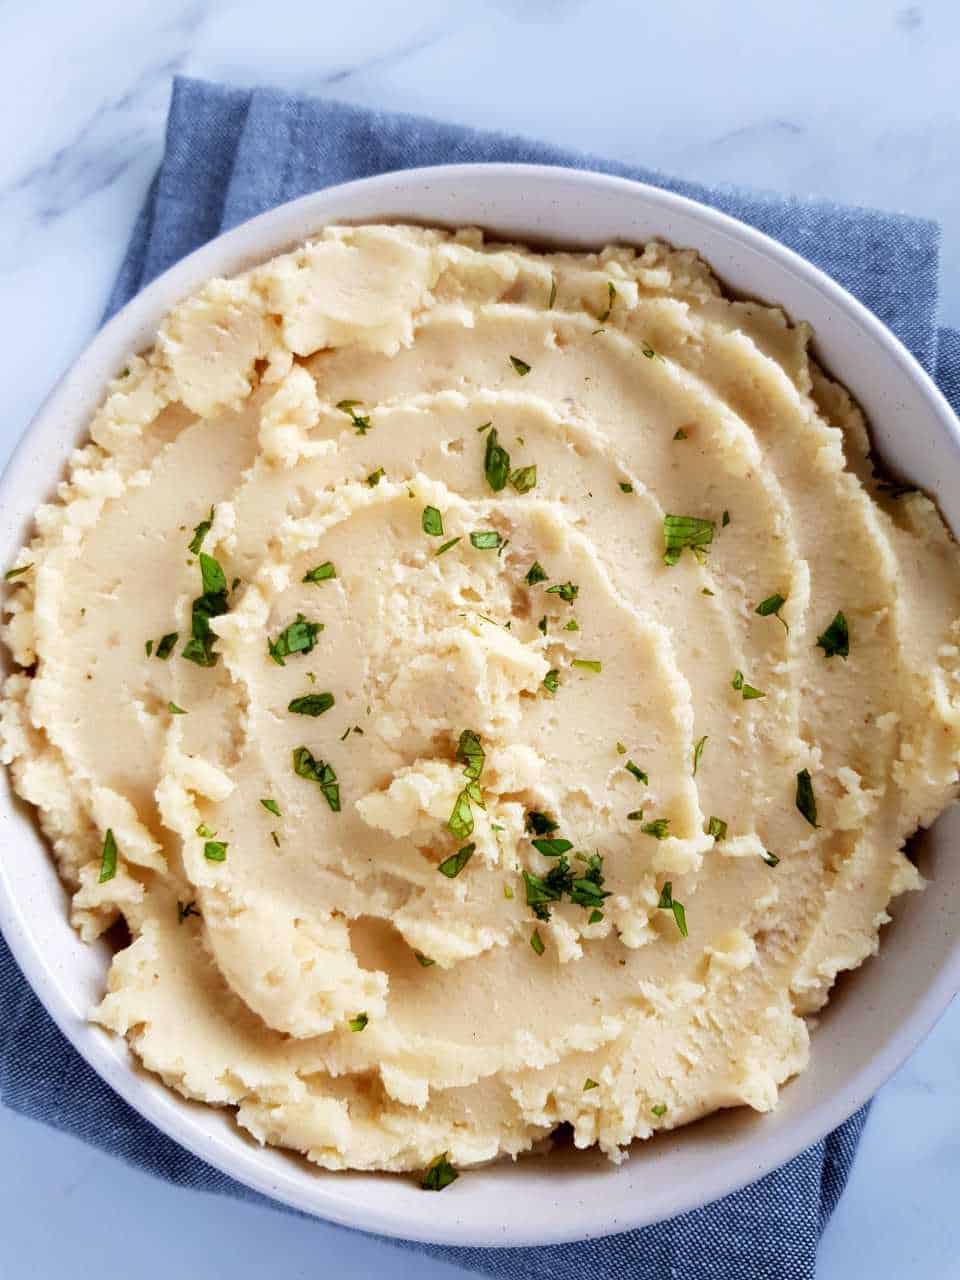 Mashed potatoes in a white bowl topped with fresh herbs.